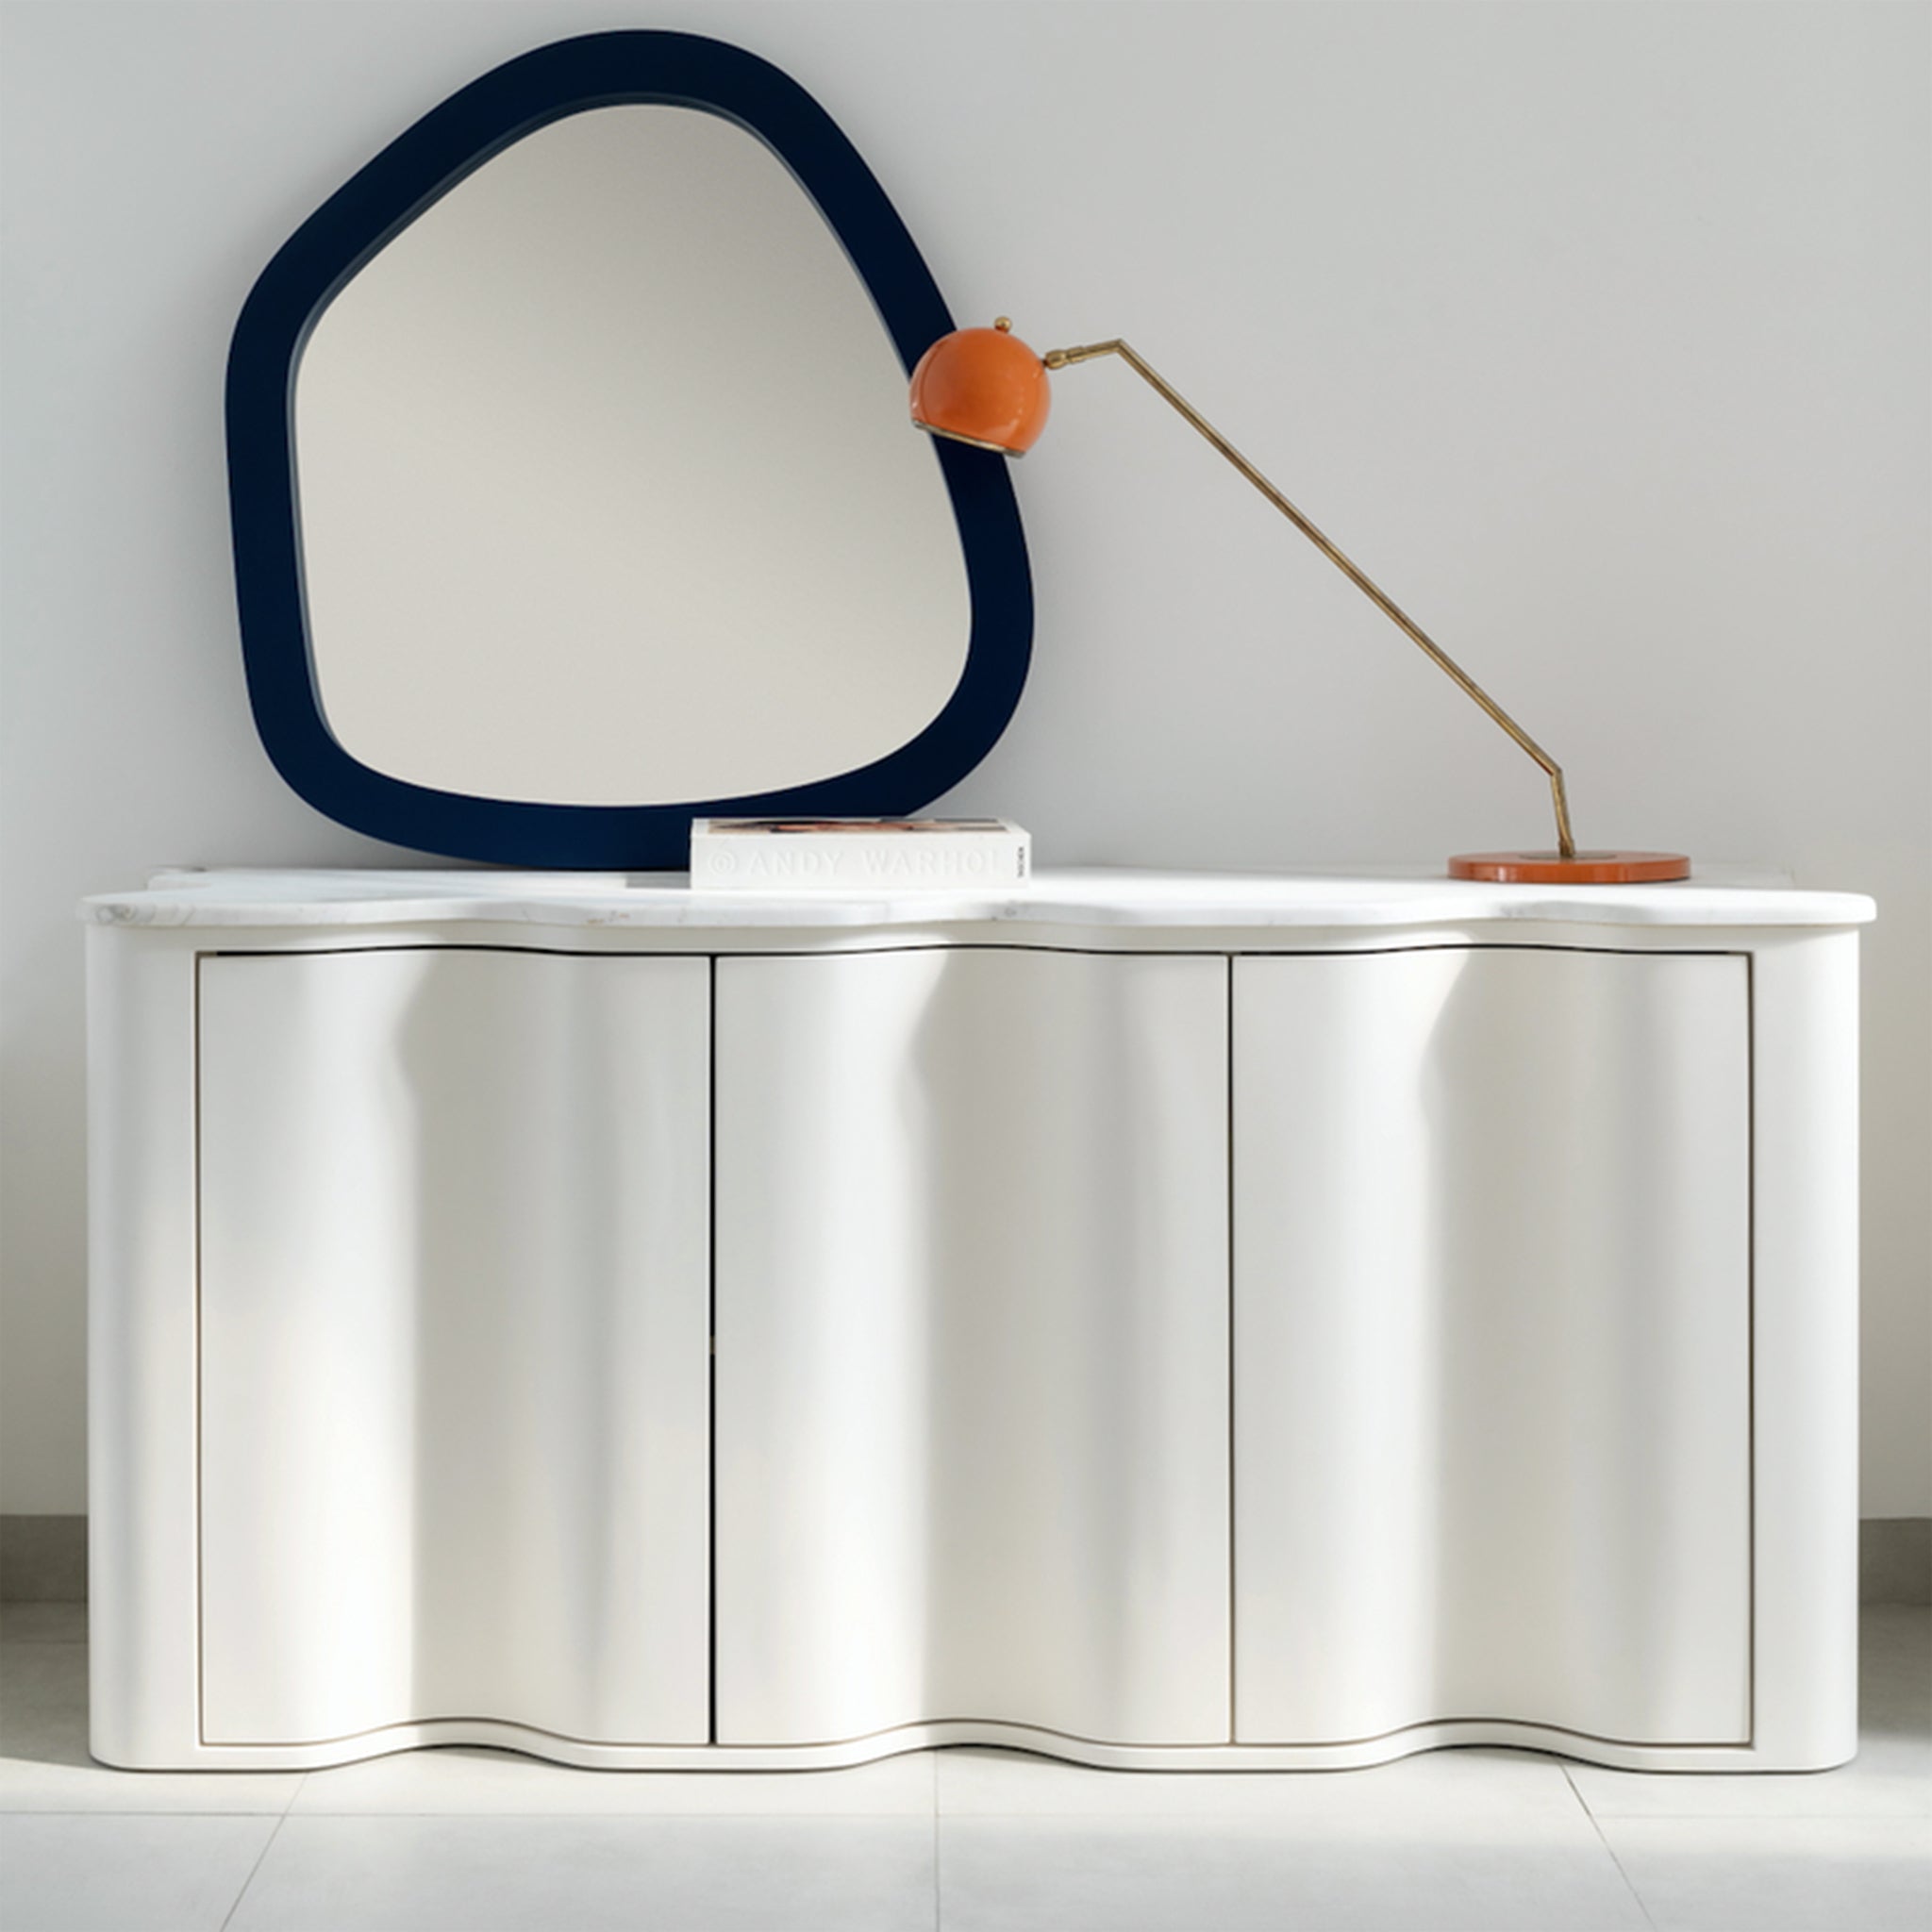 A modern sideboard with a wavy front design and a white marble top, decorated with an abstract mirror featuring a blue frame, an orange desk lamp, and a book. The sideboard is placed against a light gray wall, exemplifying a chic and contemporary interior style.